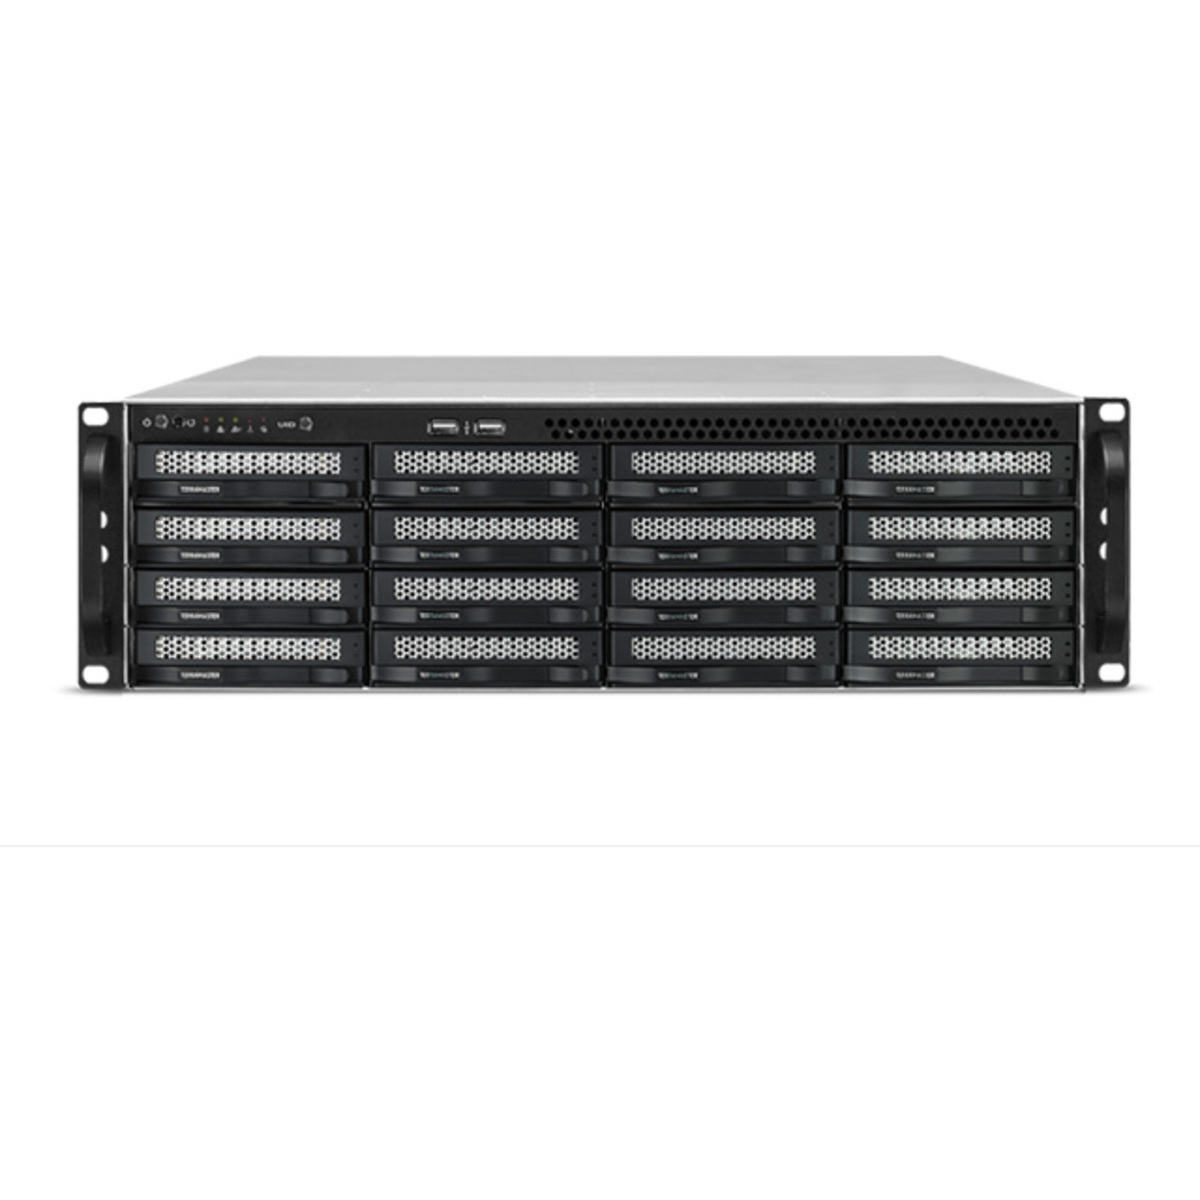 TerraMaster U16-722-2224 40tb 16-Bay RackMount Large Business / Enterprise NAS - Network Attached Storage Device 10x4tb Seagate IronWolf ST4000VN006 3.5 5400rpm SATA 6Gb/s HDD NAS Class Drives Installed - Burn-In Tested U16-722-2224